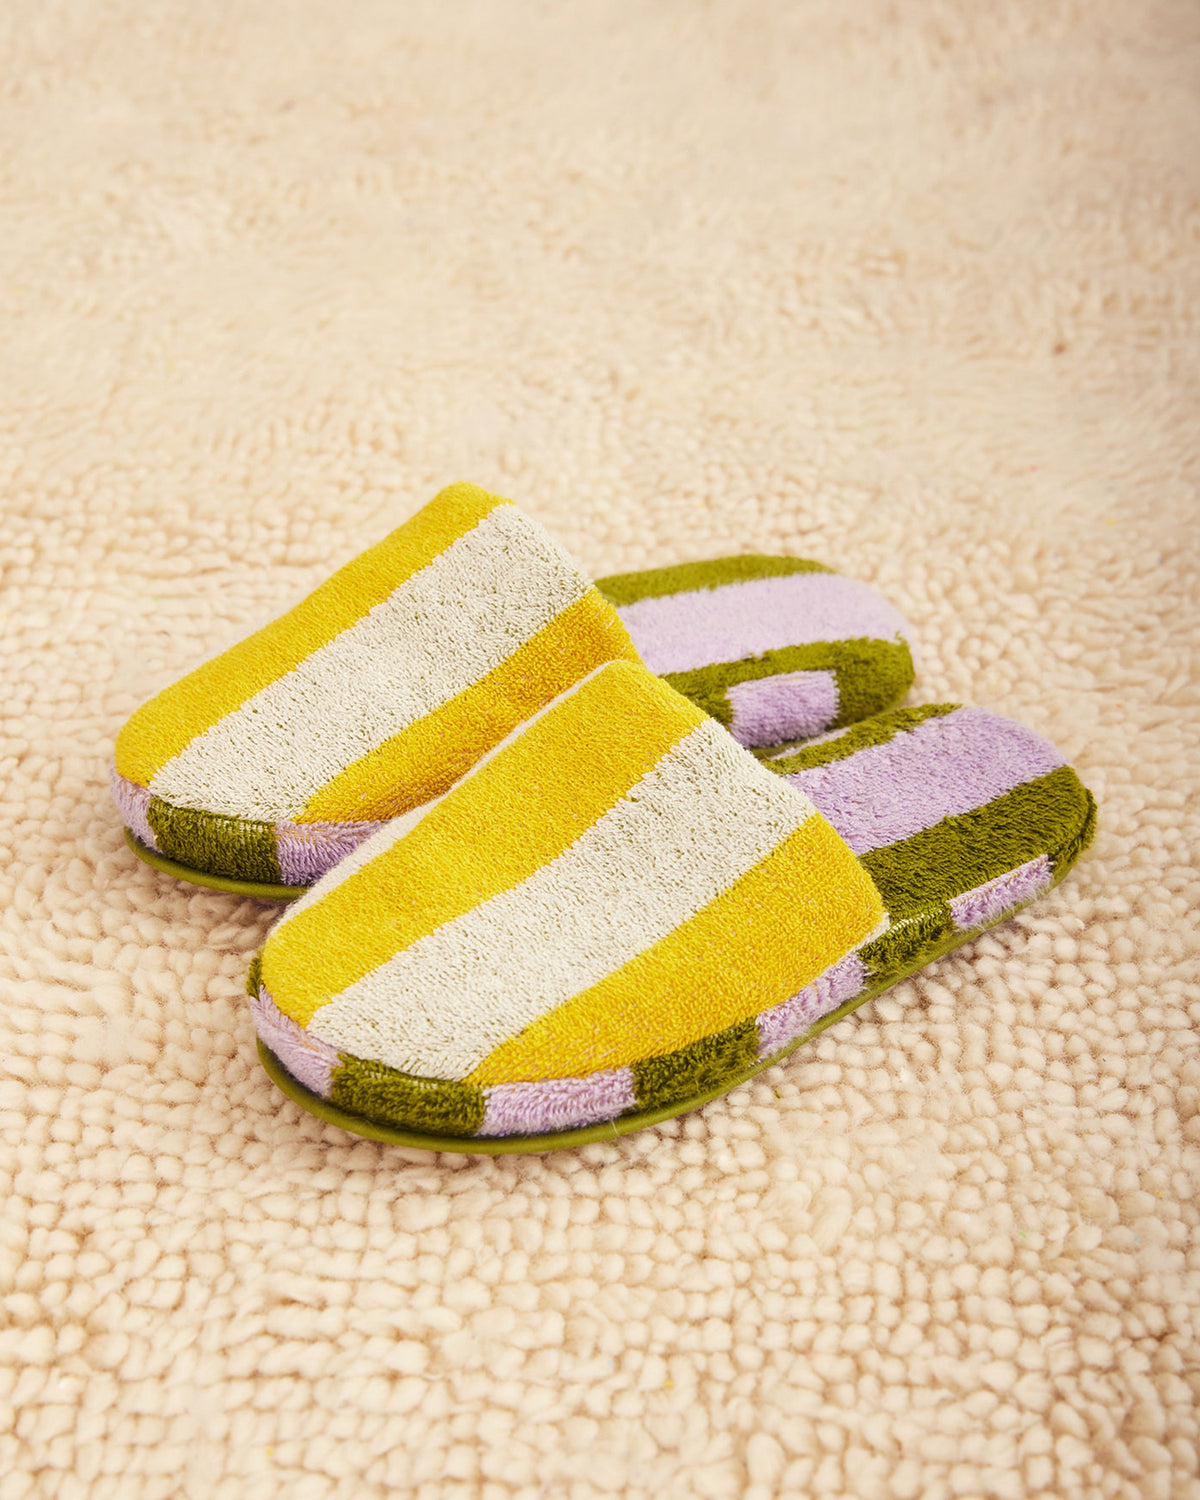 Dusen Dusen Stripe Slippers in Sea. Contrasting stripes and colorways on the outer shell and plush inner sole. 95% Cotton, 450gsm and 5% Polyamide/Nomex/Meryl. This item is Oeko-Tex Standard 100 certified (no harmful chemicals were used during production). Made in Portugal.